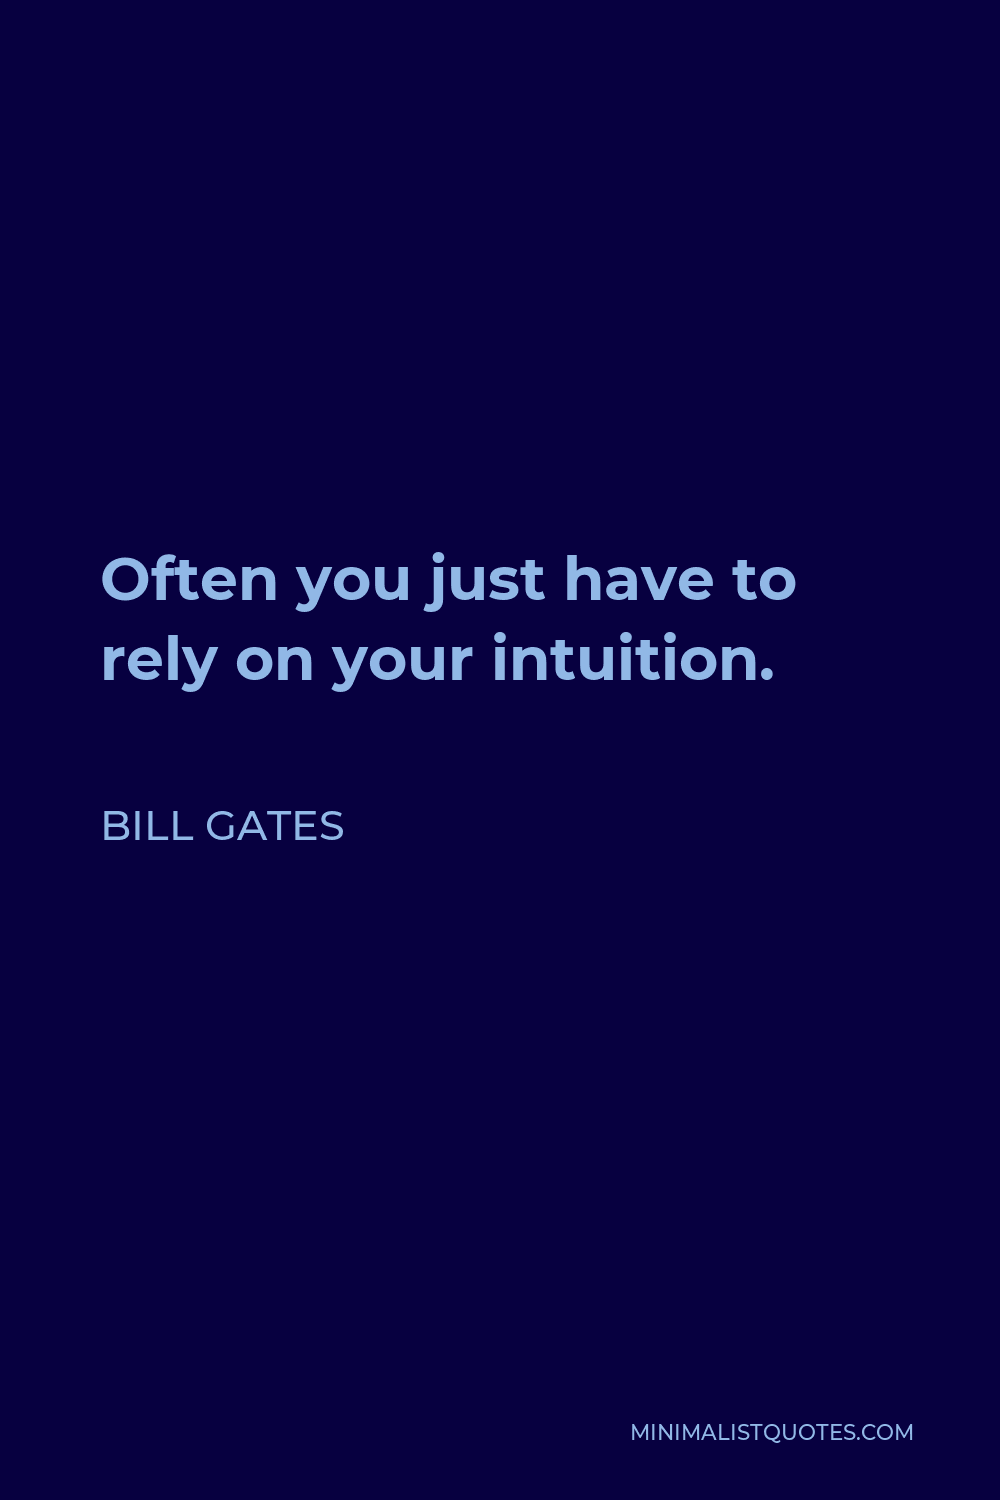 Bill Gates Quote - Often you just have to rely on your intuition.